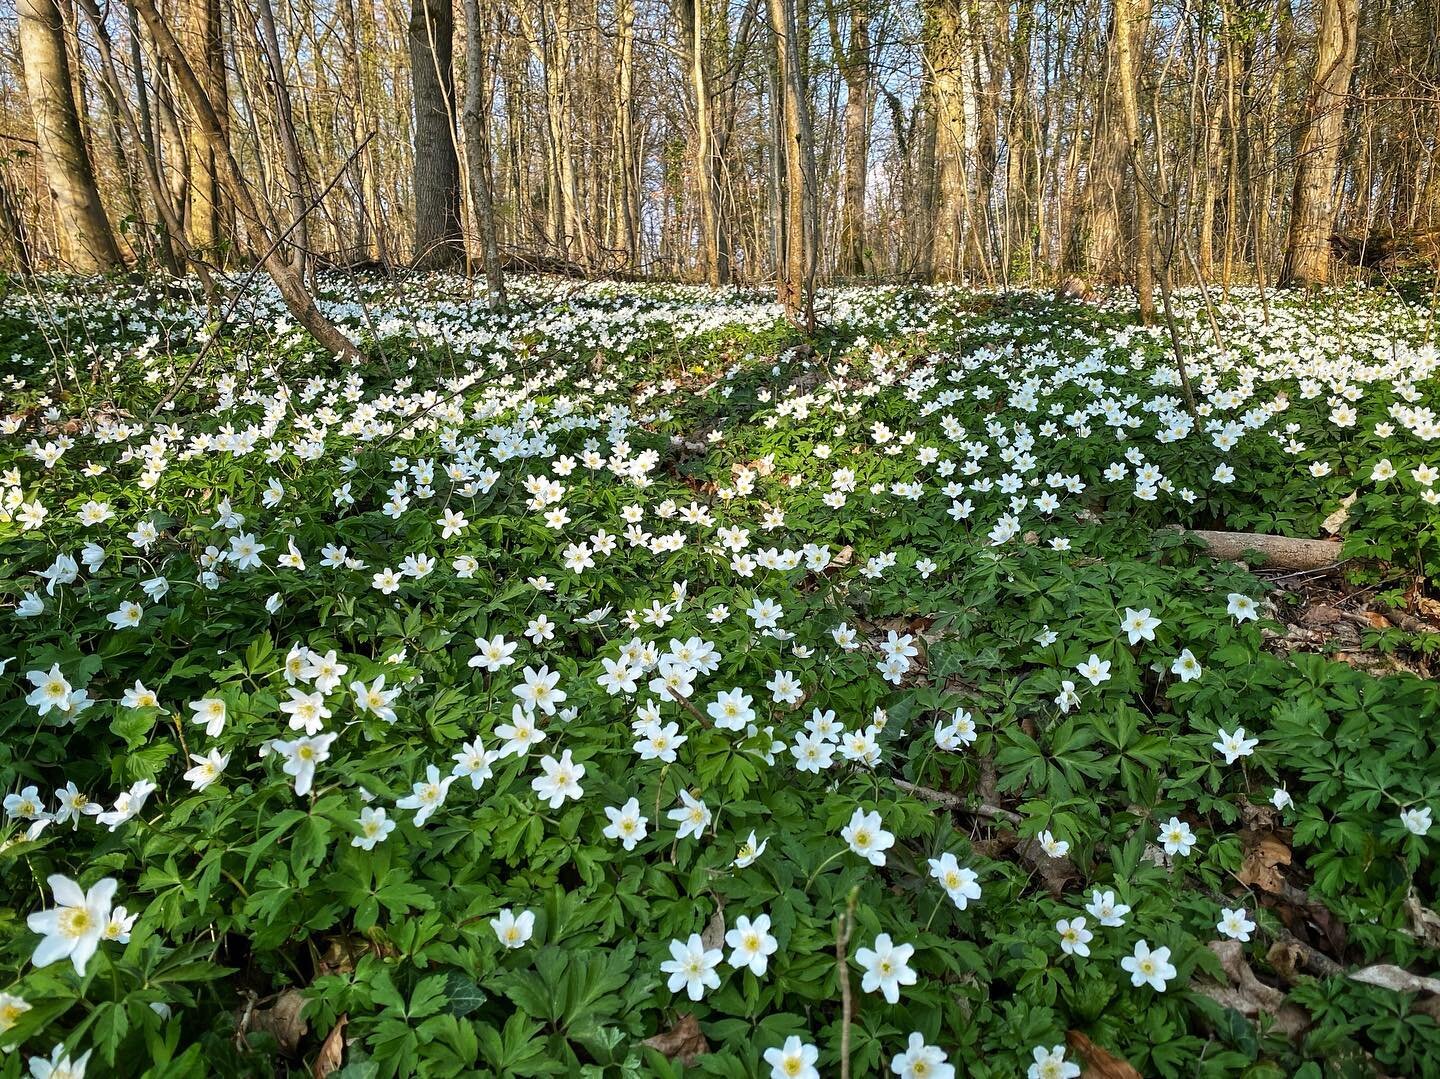 Have you noticed the woodlands come alive during the past few weeks? So many plants put on their best display before the forest becomes too dense and light is reduced on the woodland floor. I was greeted by these carpets of wood anemones during my fo